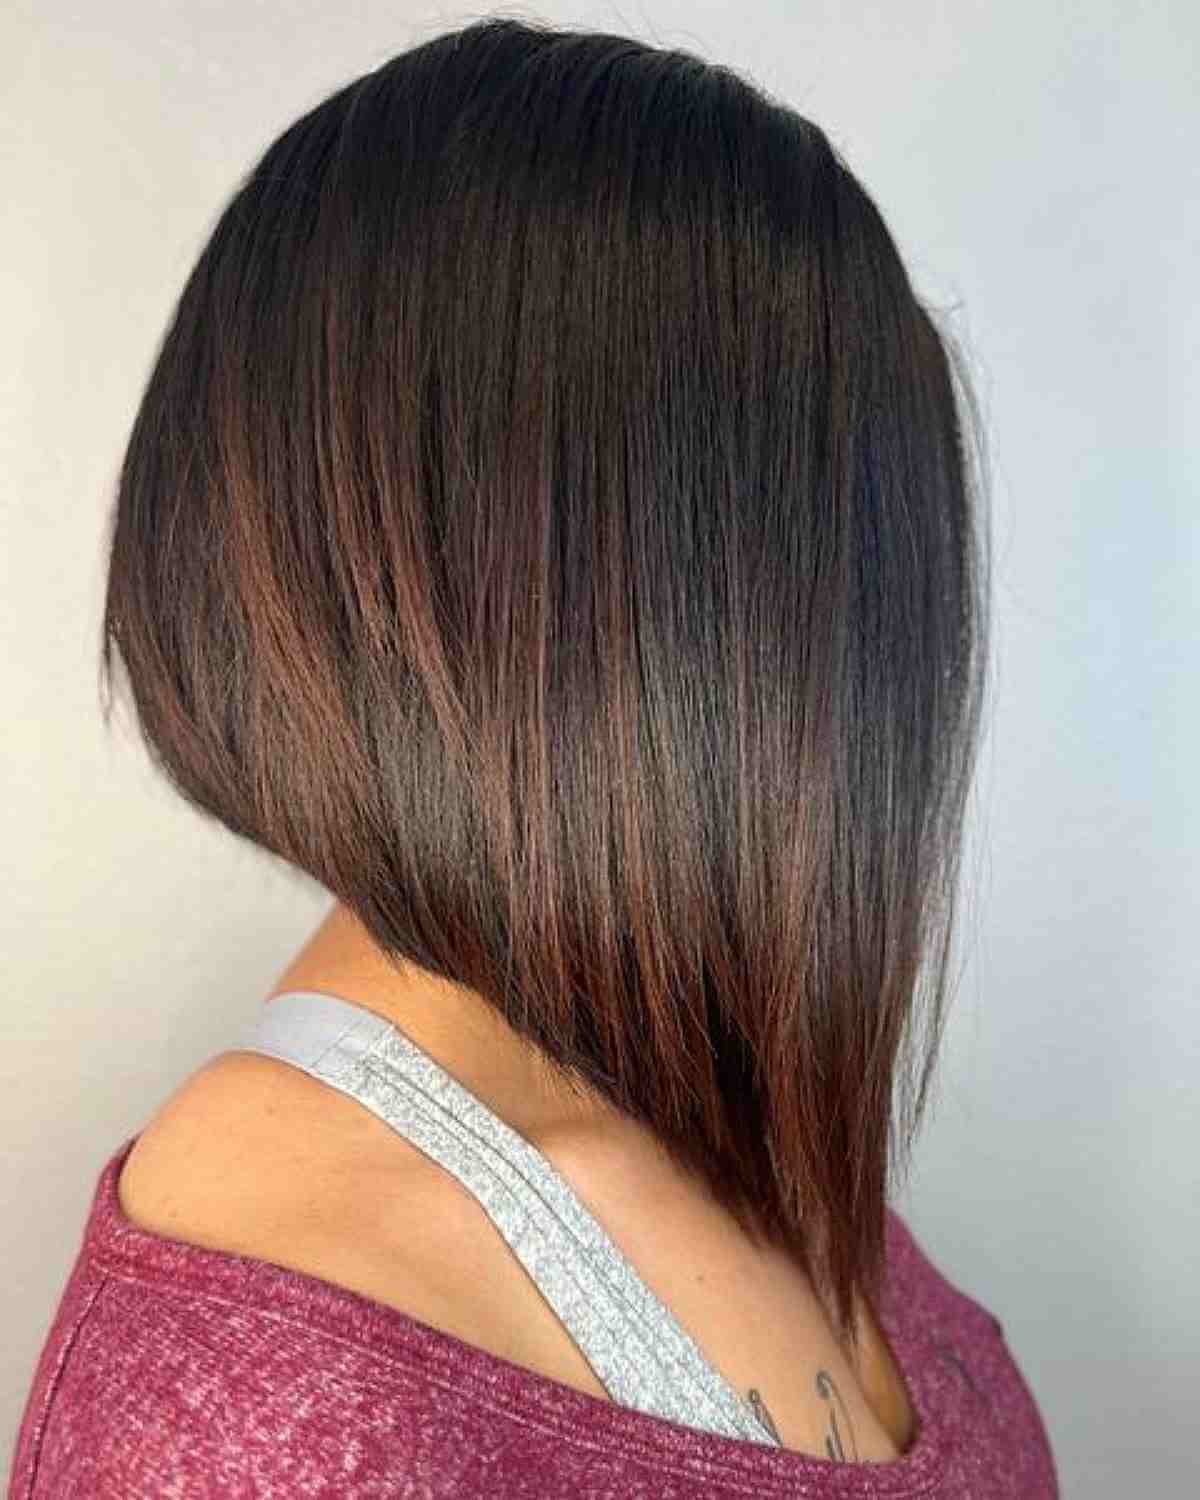 Inverted Bob With Brown Highlights and Dark Hair